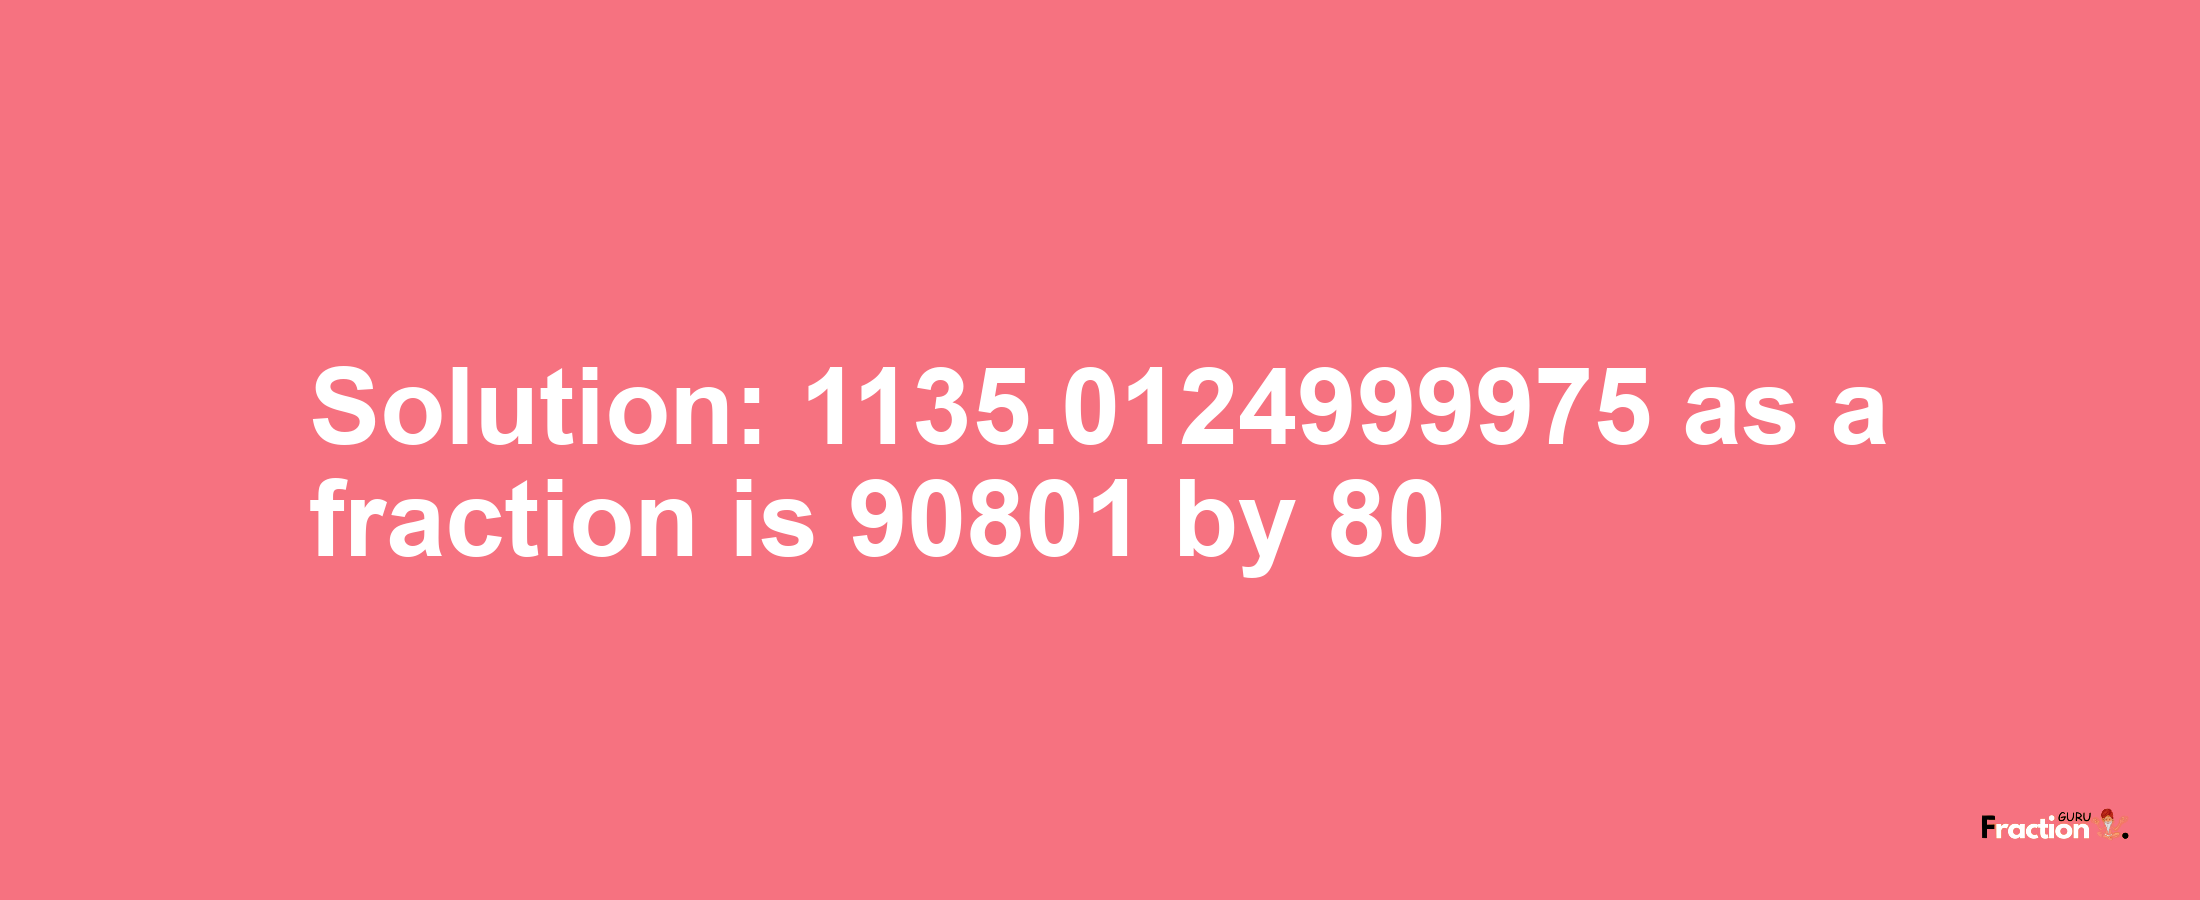 Solution:1135.0124999975 as a fraction is 90801/80